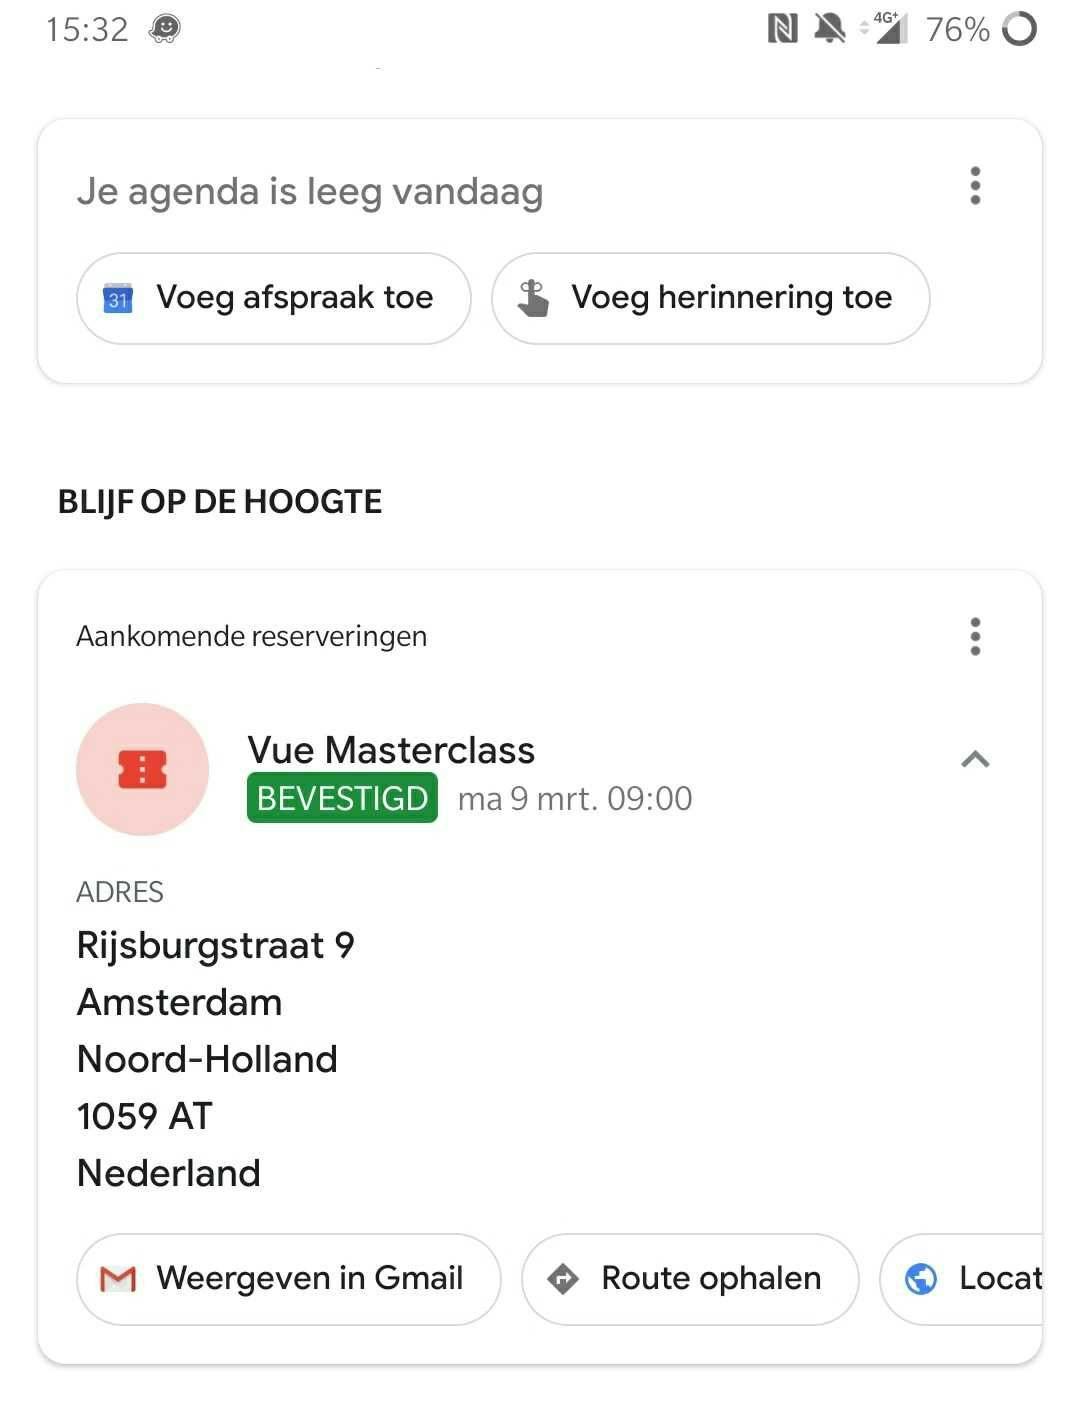 The Meetup added to the Google app of the attendee